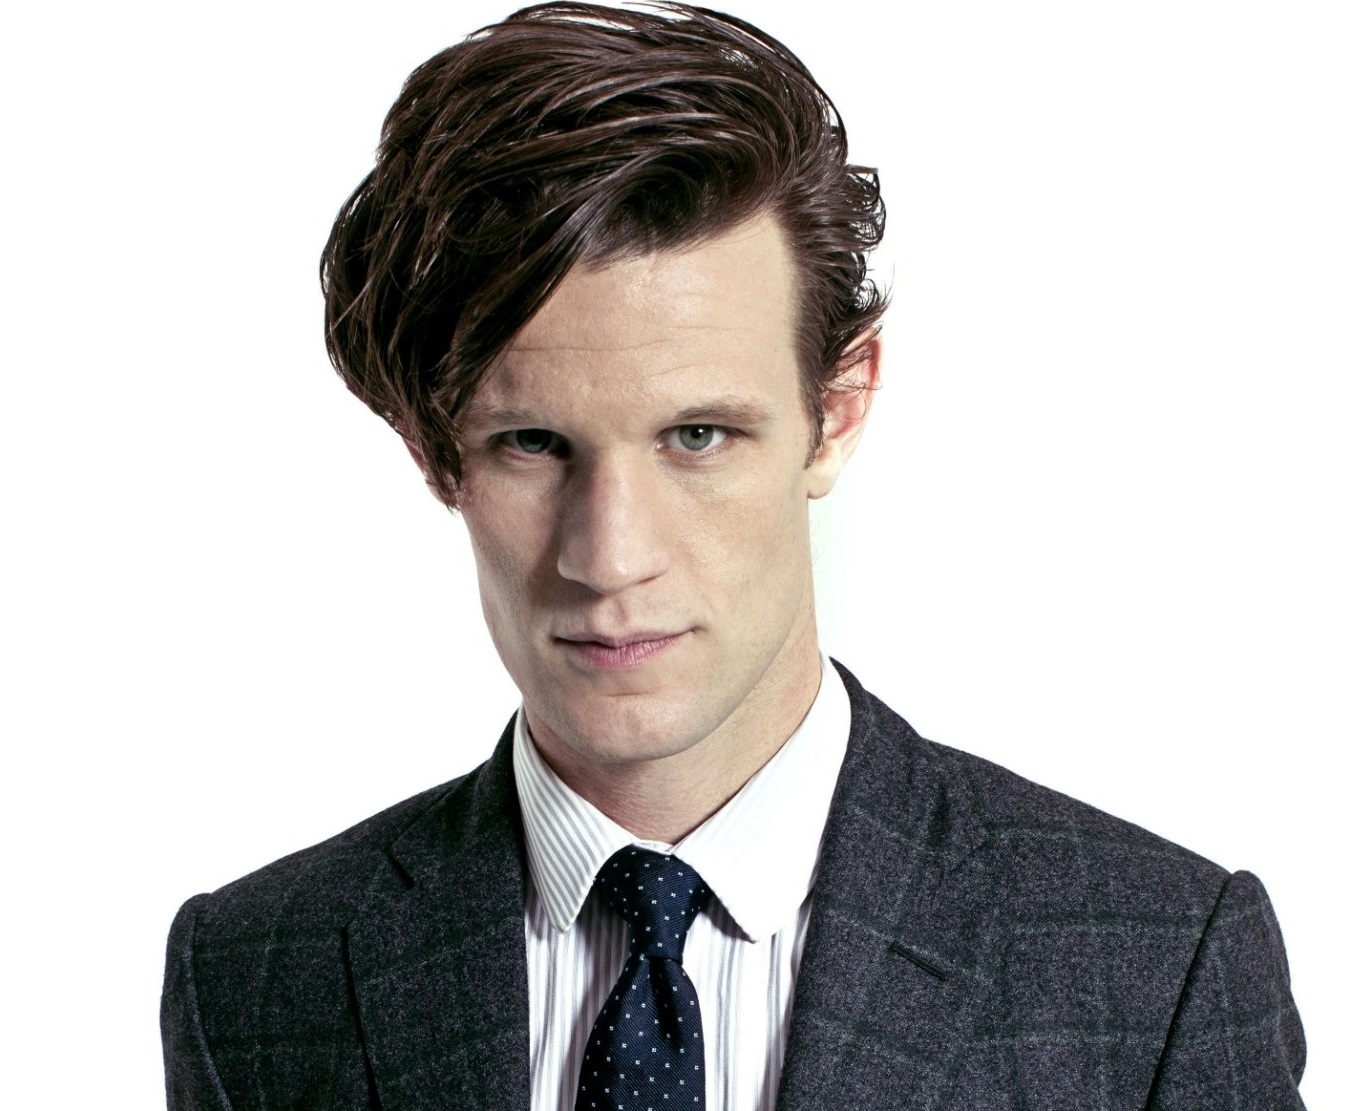 Geek insider, geekinsider, geekinsider. Com,, matt smith cast in 'pride and prejudice and zombies', entertainment